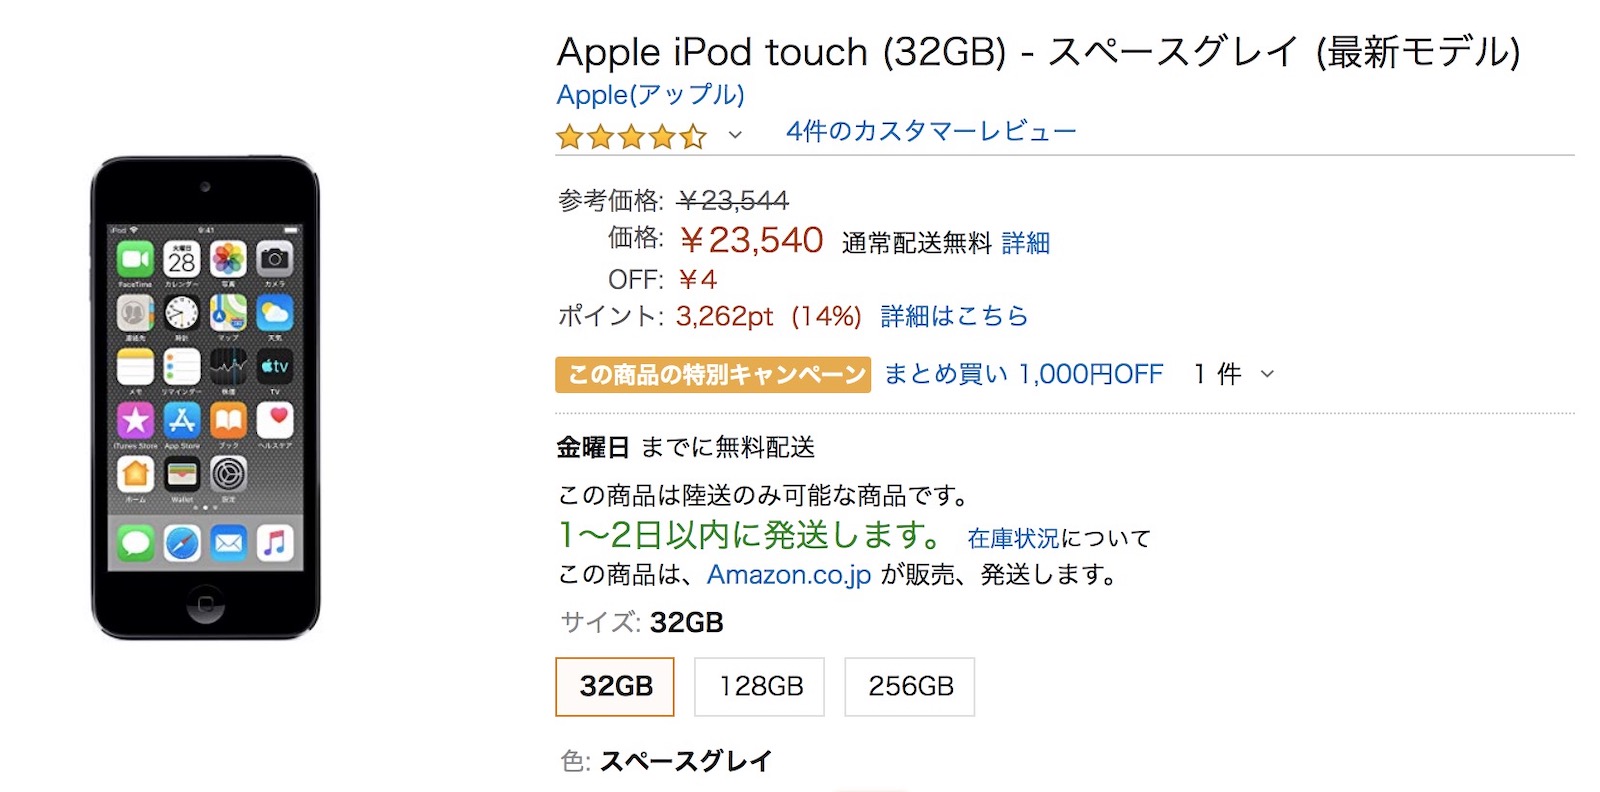 ipod-touch-is-on-sale.jpg